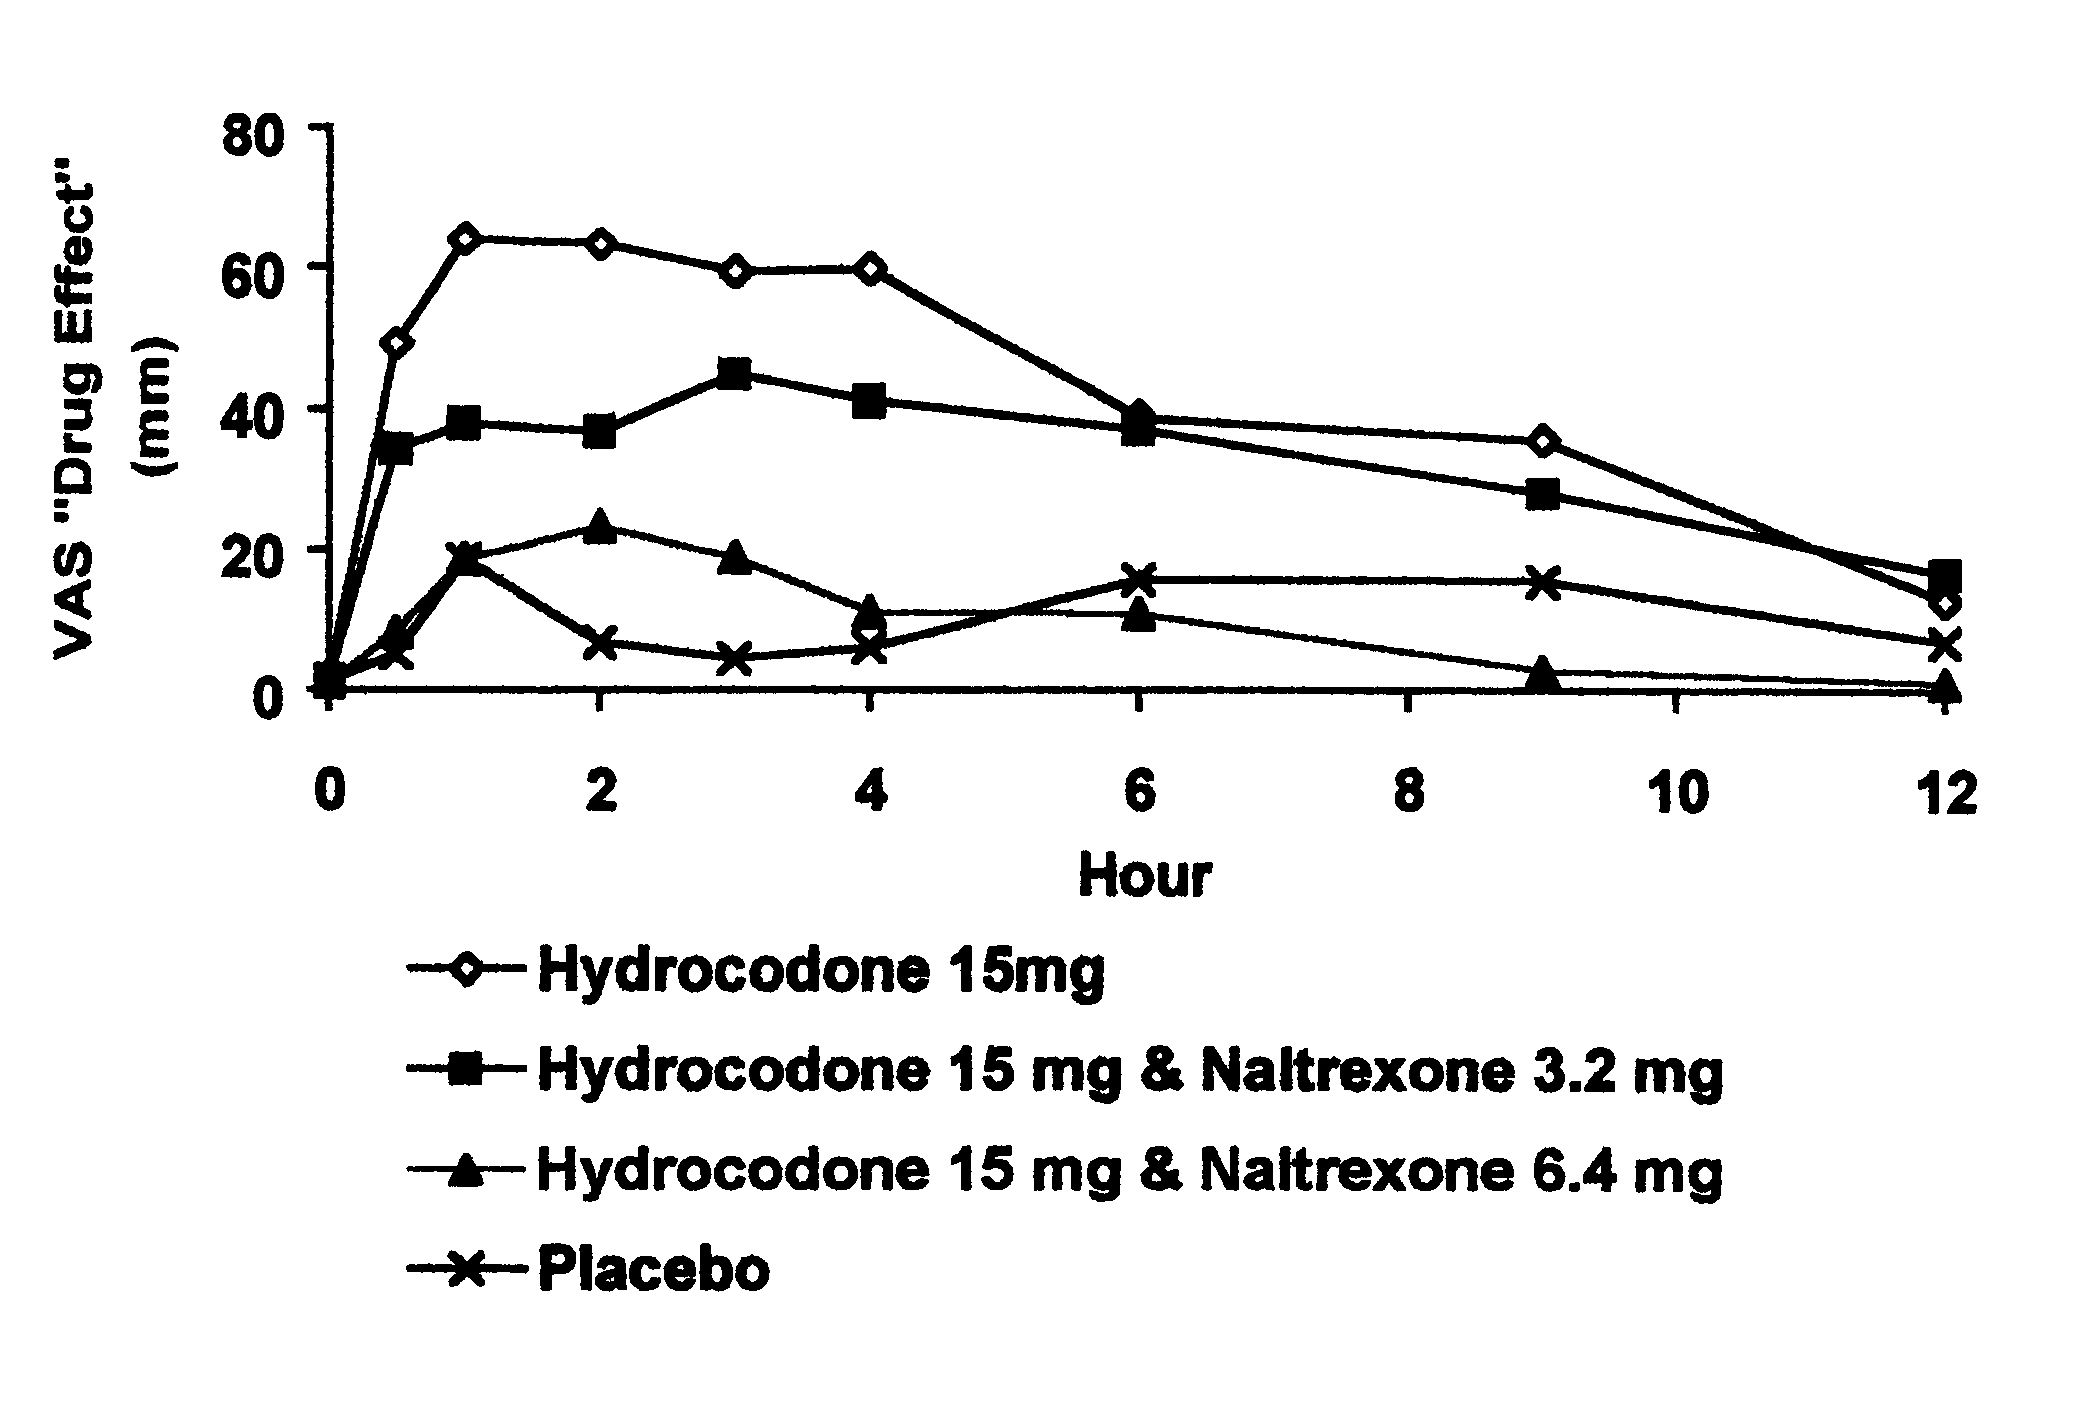 Opioid agonist/antagonist combinations